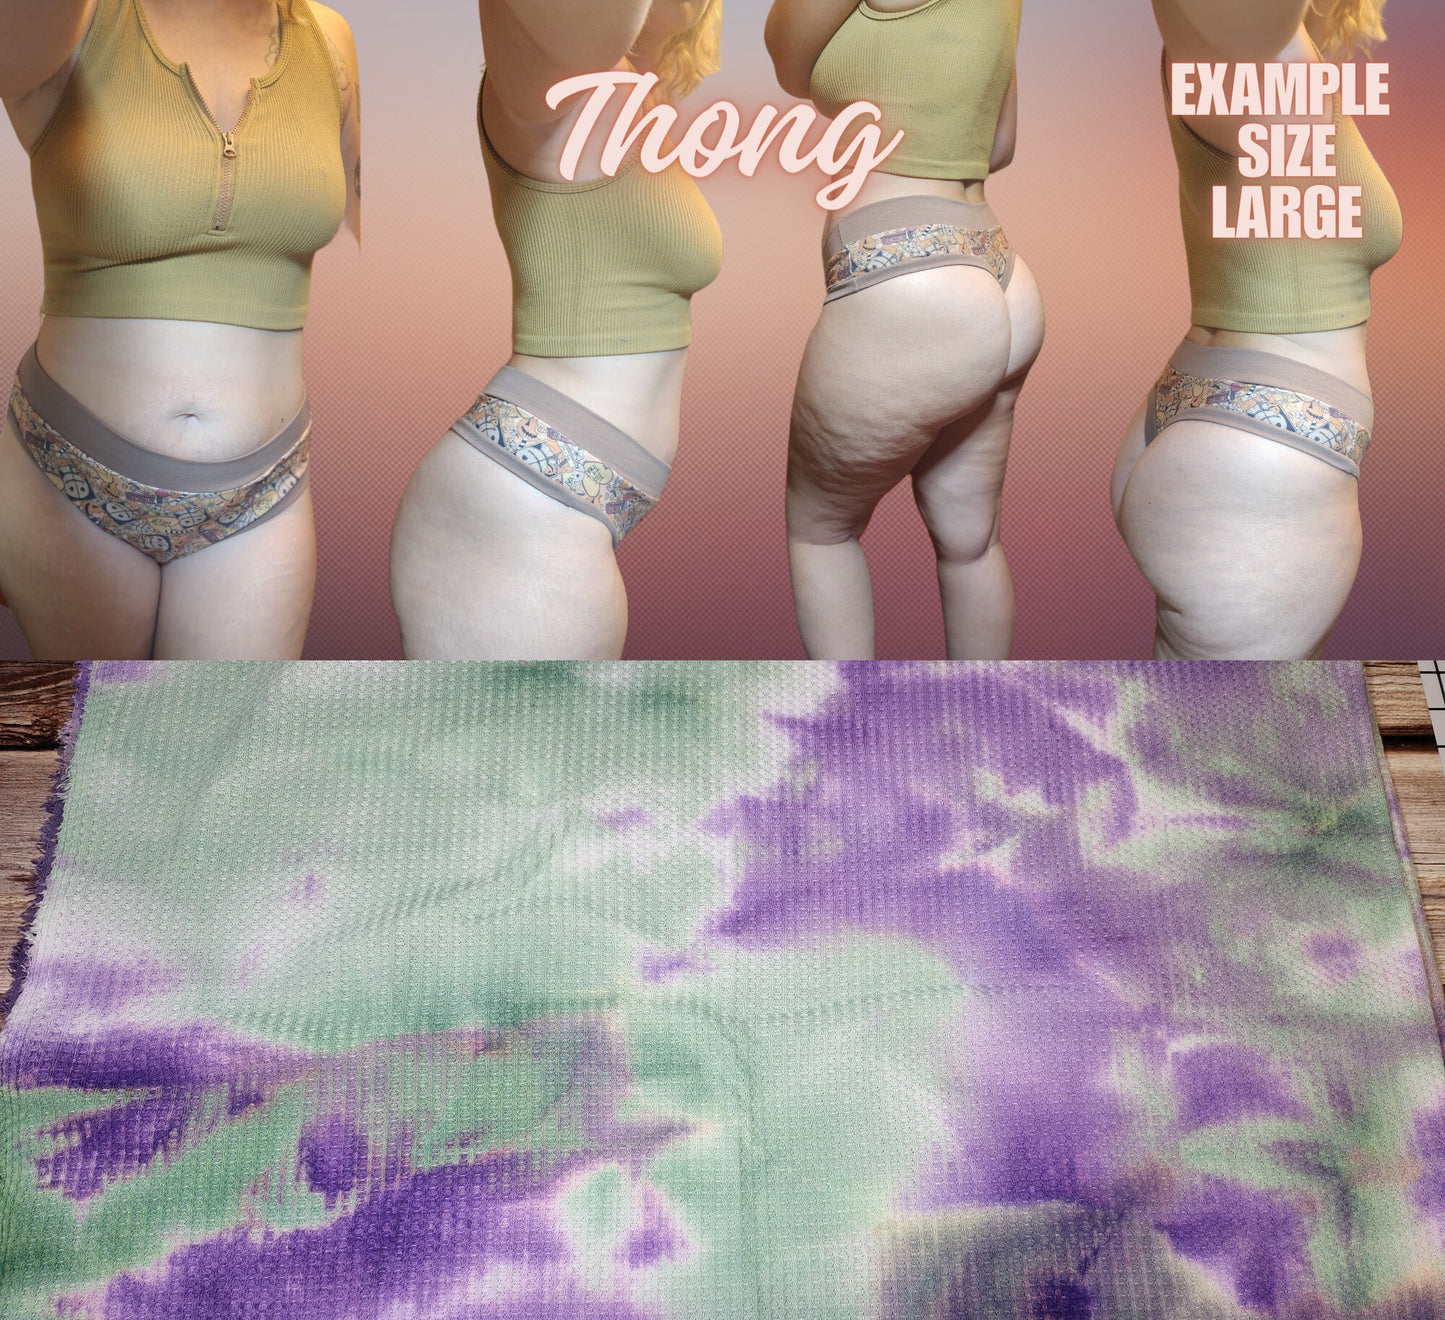 Tie Dye x6 Prints | Thondlewear, Thongs for every body | Elastic/Knit Bands